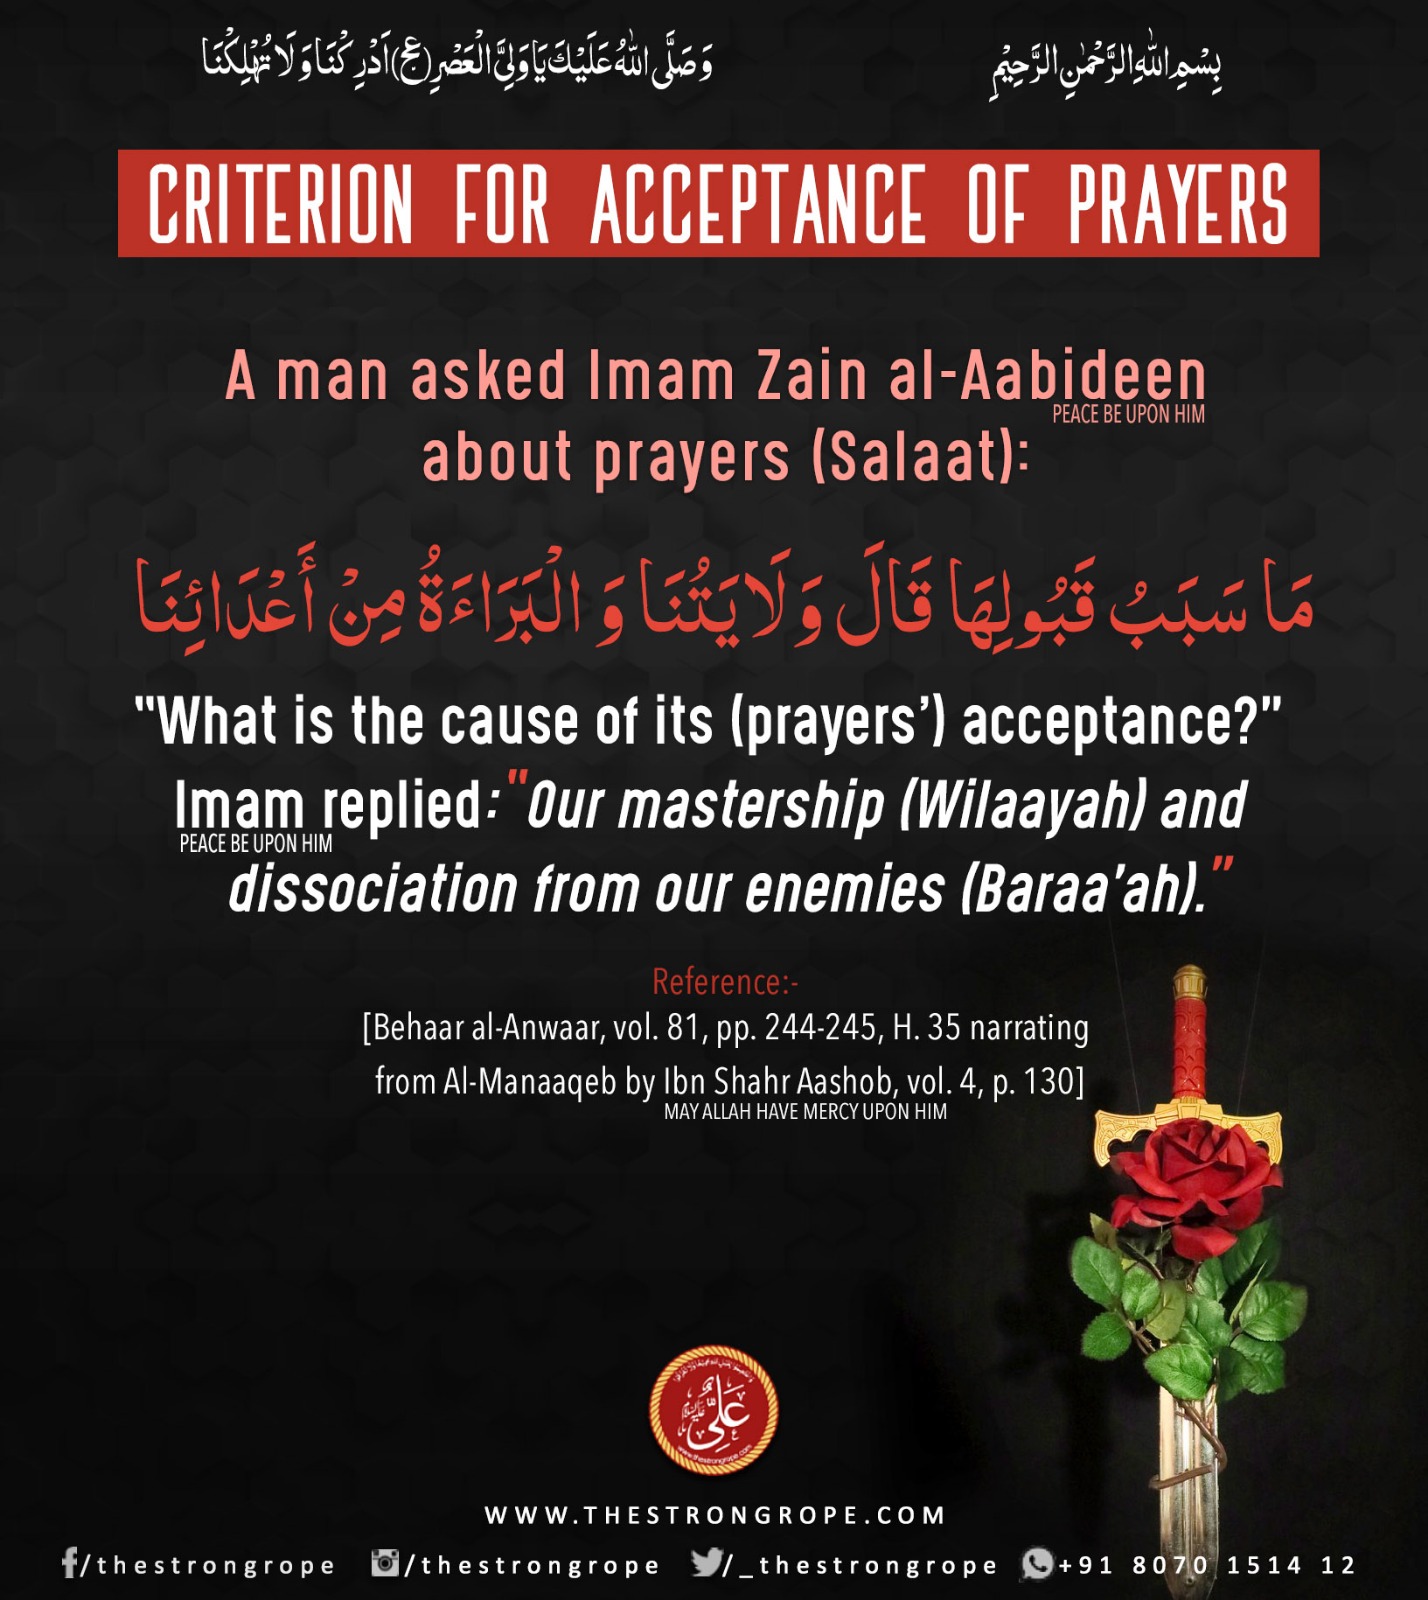 Criterion for Acceptance of Prayers